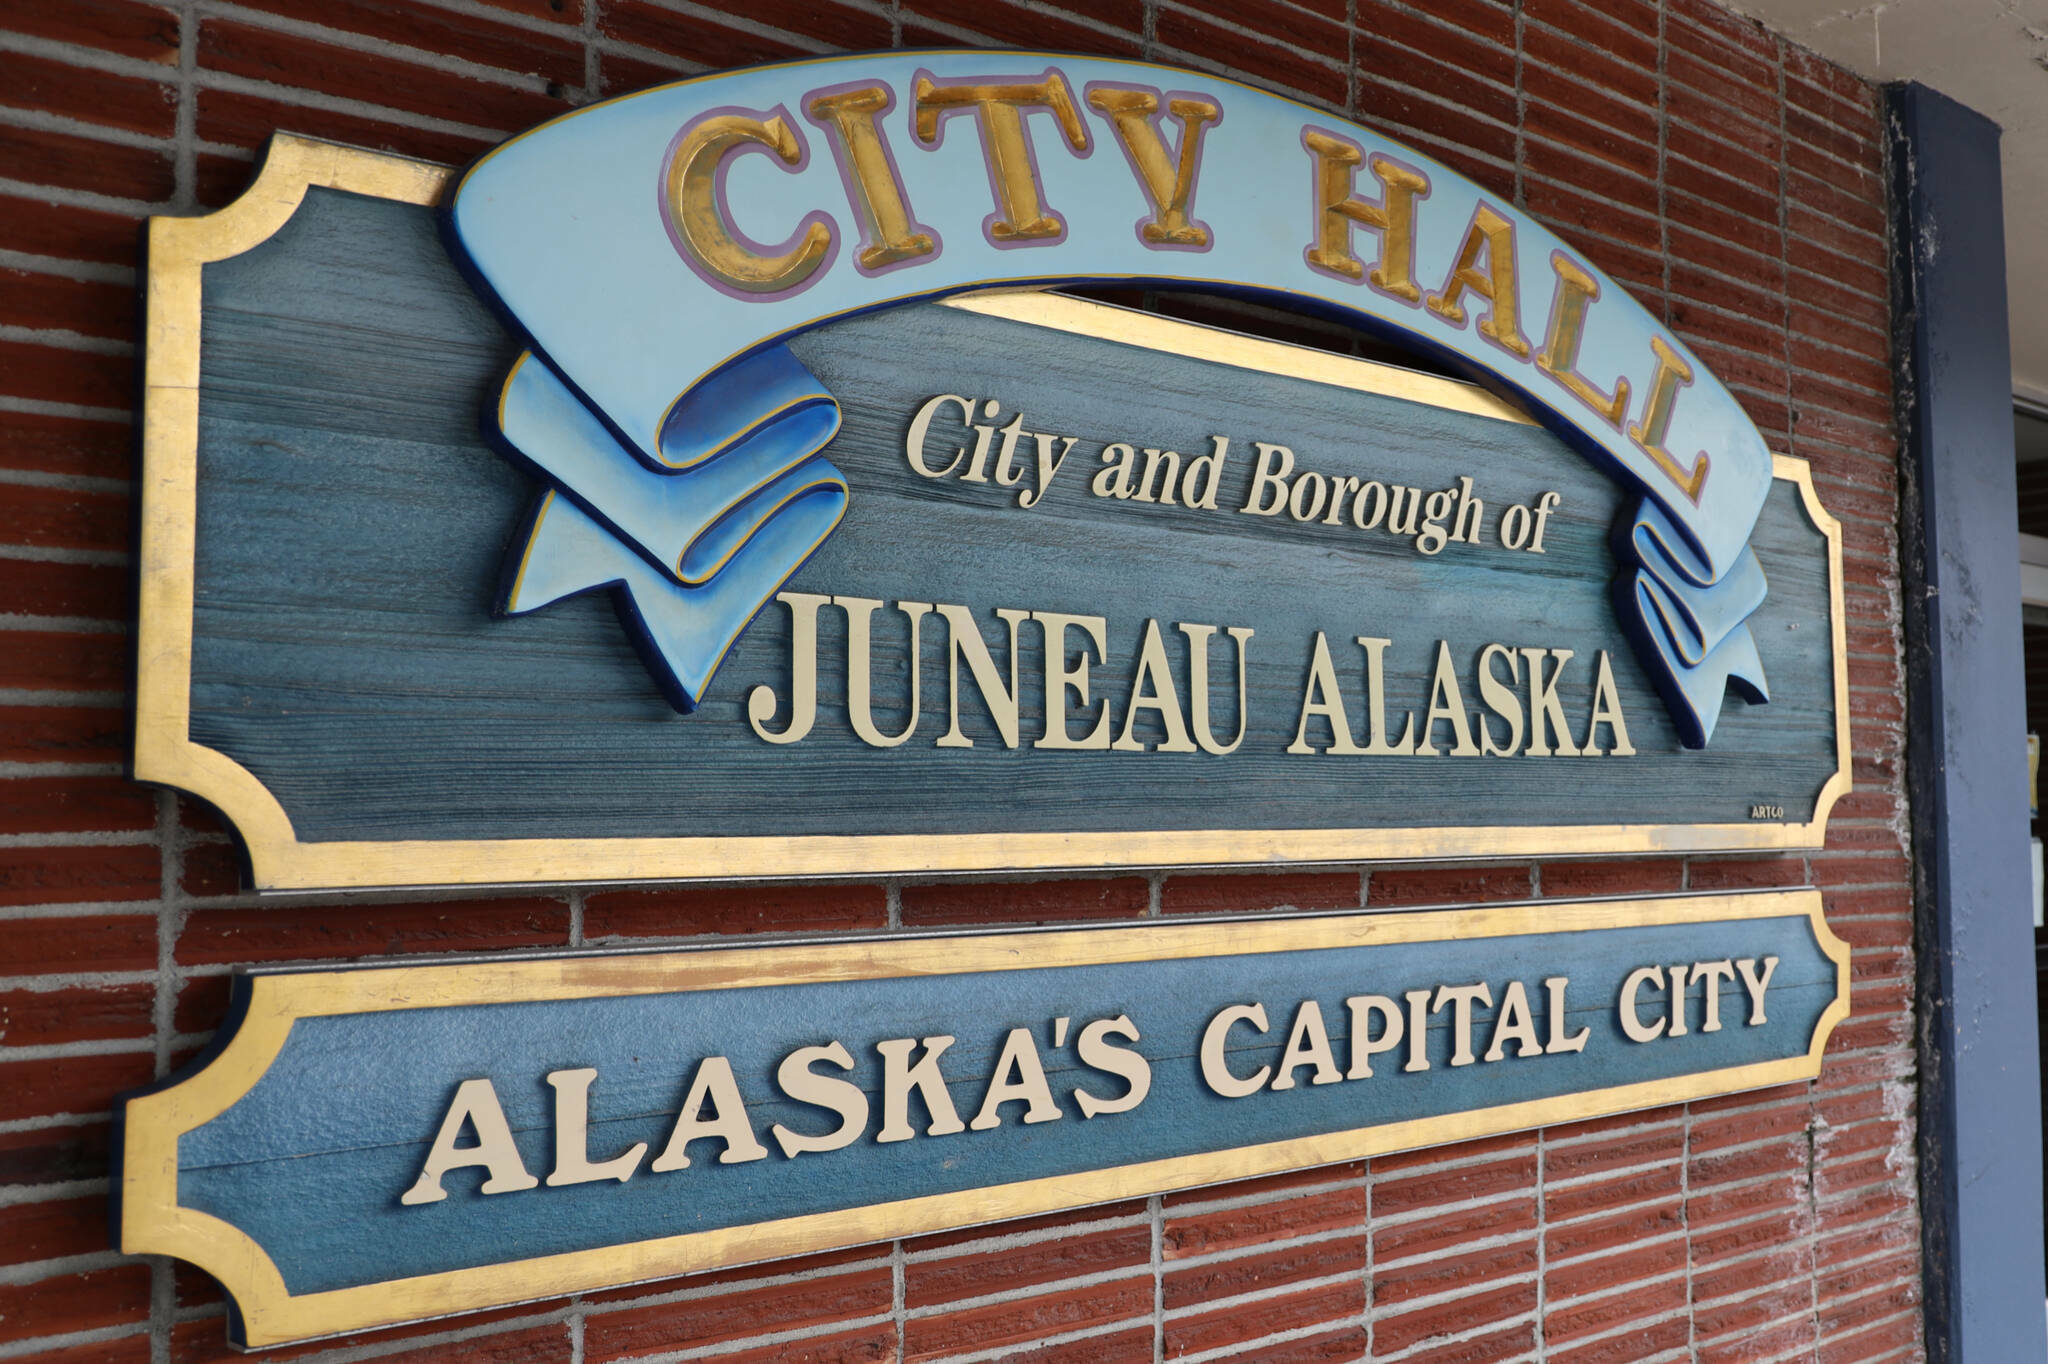 Juneau’s current City Hall is outdated, according to local municipal leaders who are hoping voters will approve funding to help pay for a new building. A bond providing such funding was rejected last year. (Clarise Larson / Juneau Empire File)